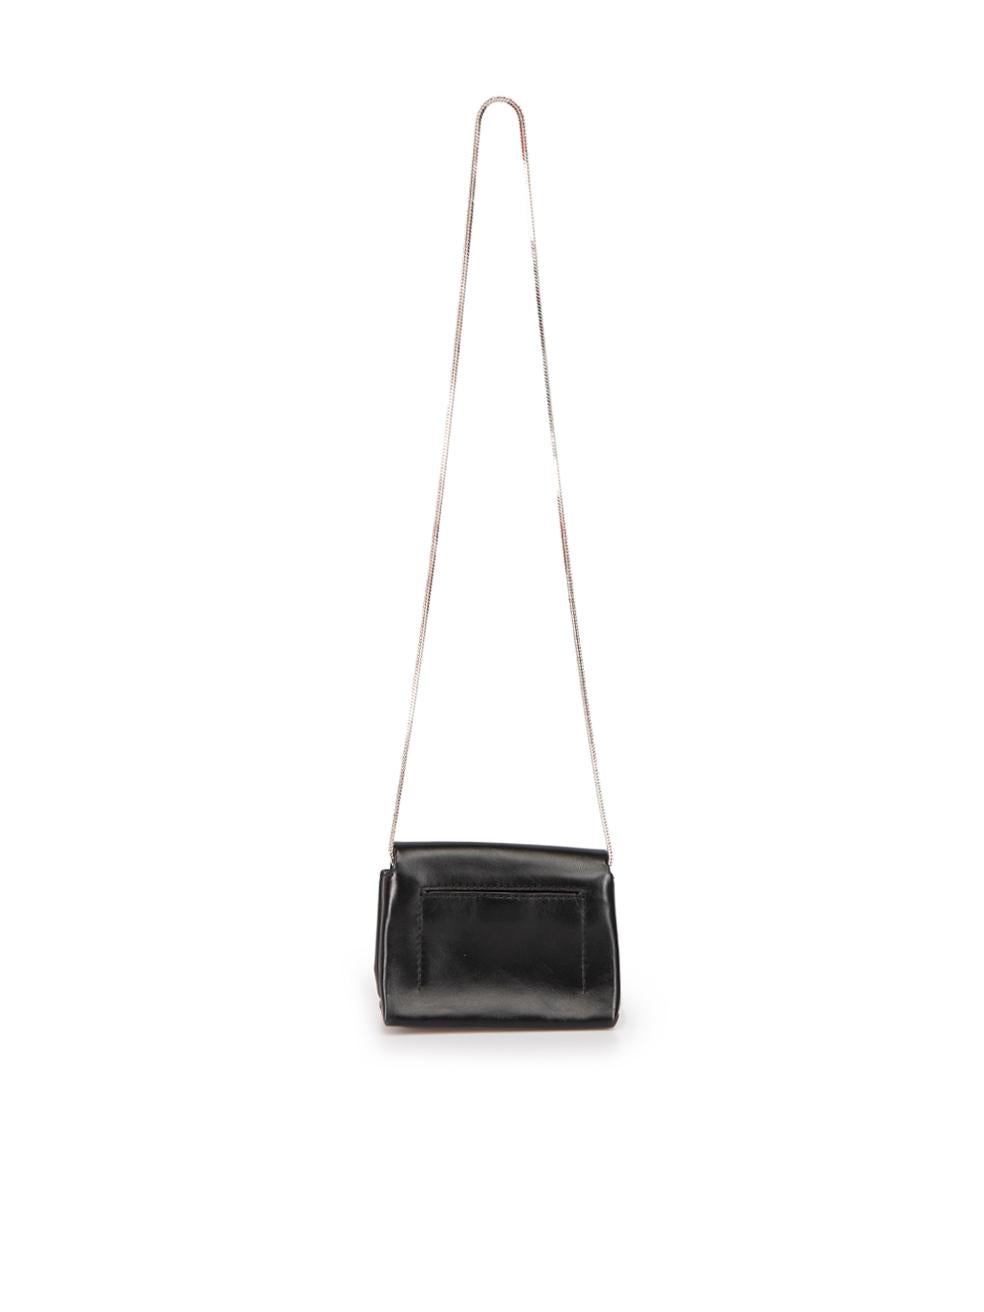 3.1 Phillip Lim Black Leather Alix Mirco Bag In Excellent Condition For Sale In London, GB